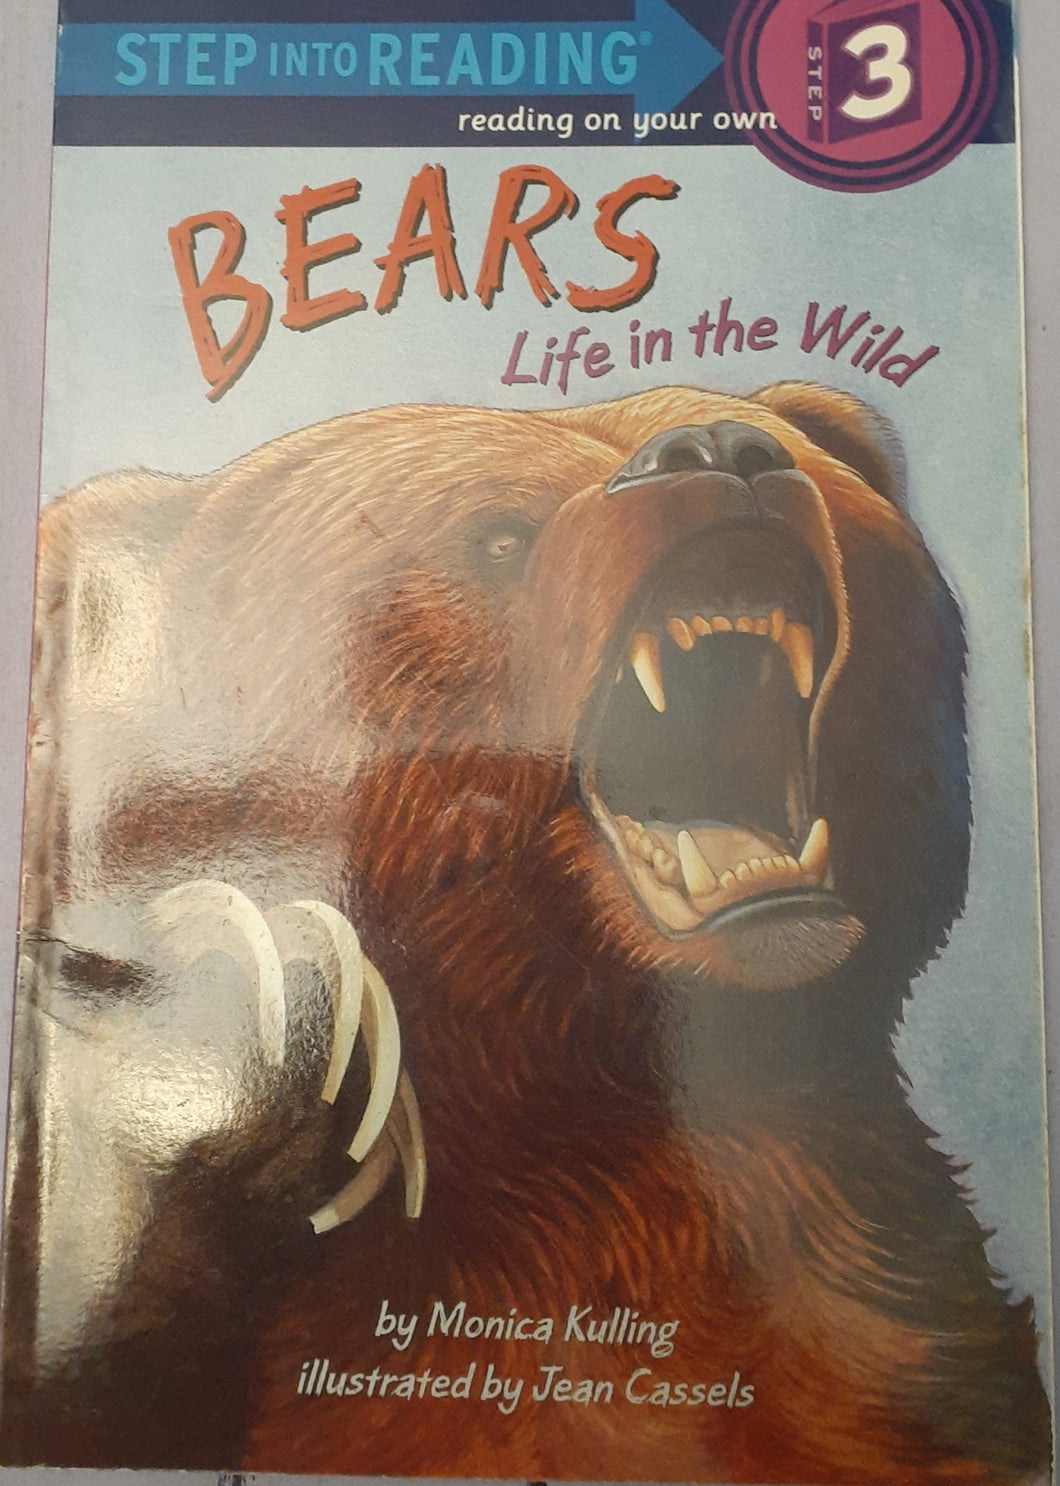 Bears - Life in the Wild